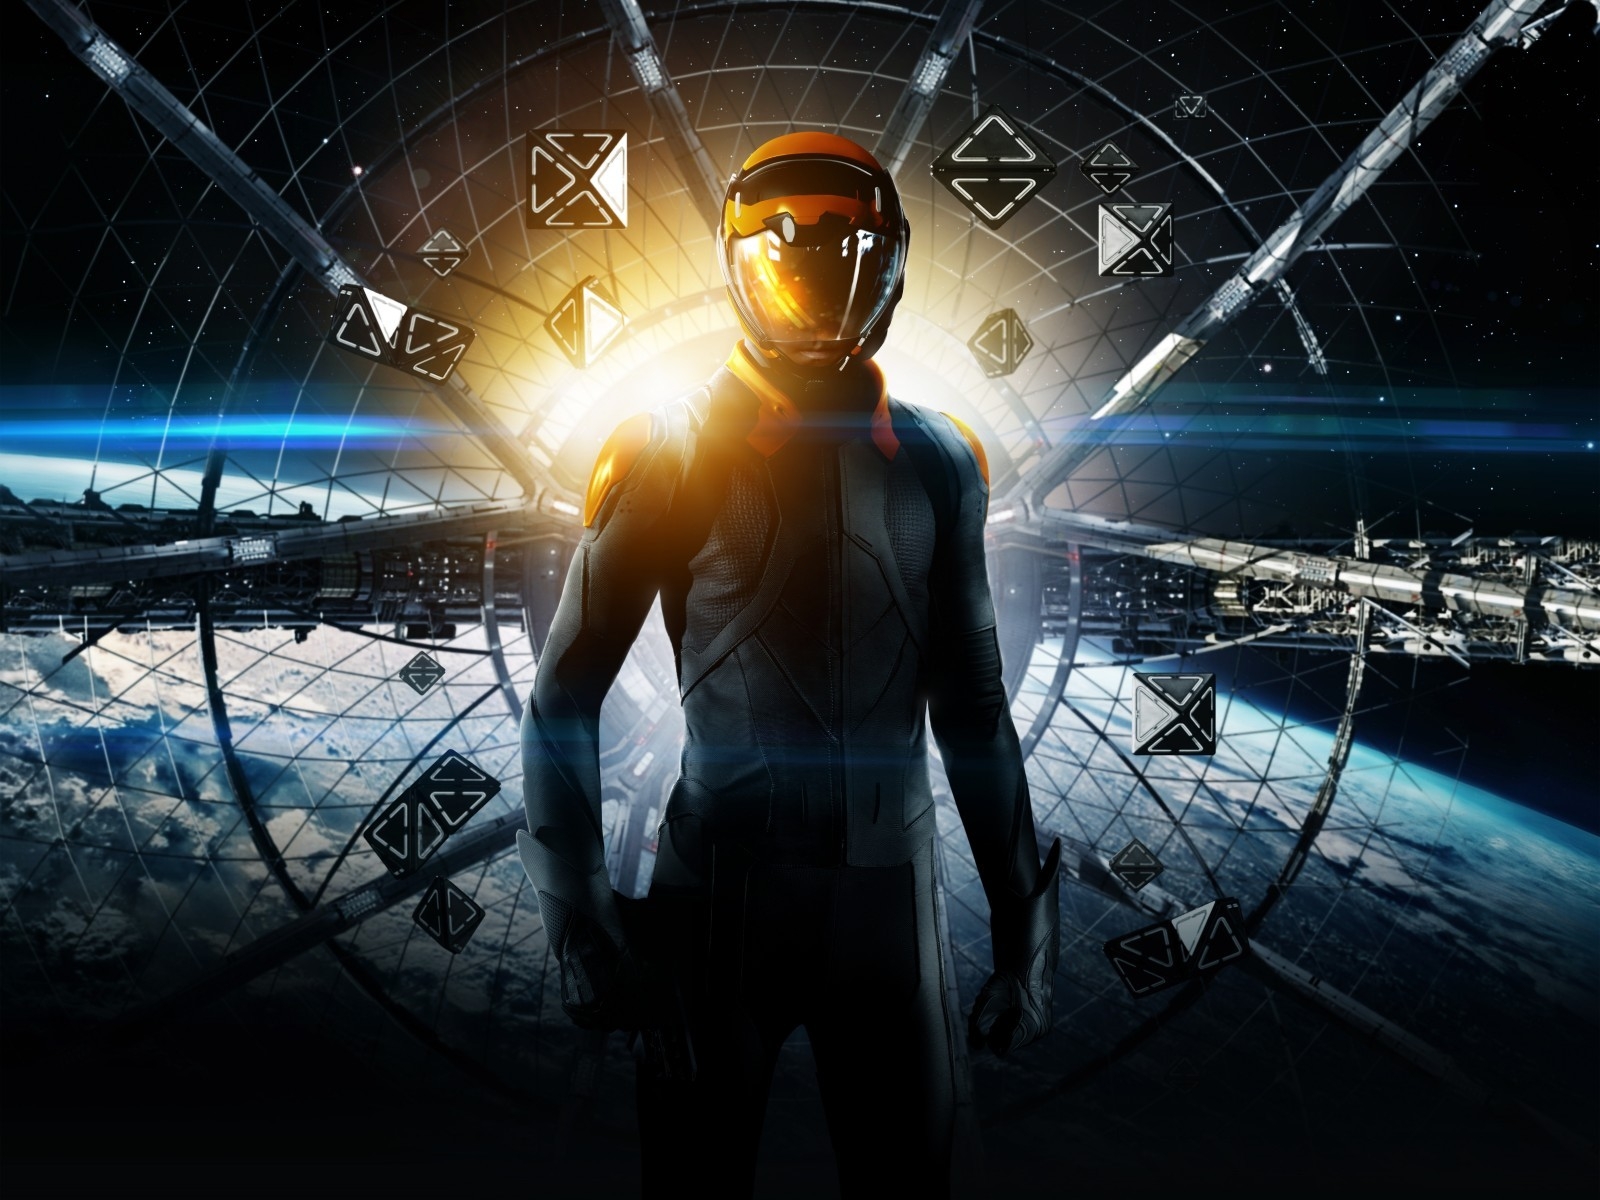 Ender's Game Poster for 1600 x 1200 resolution